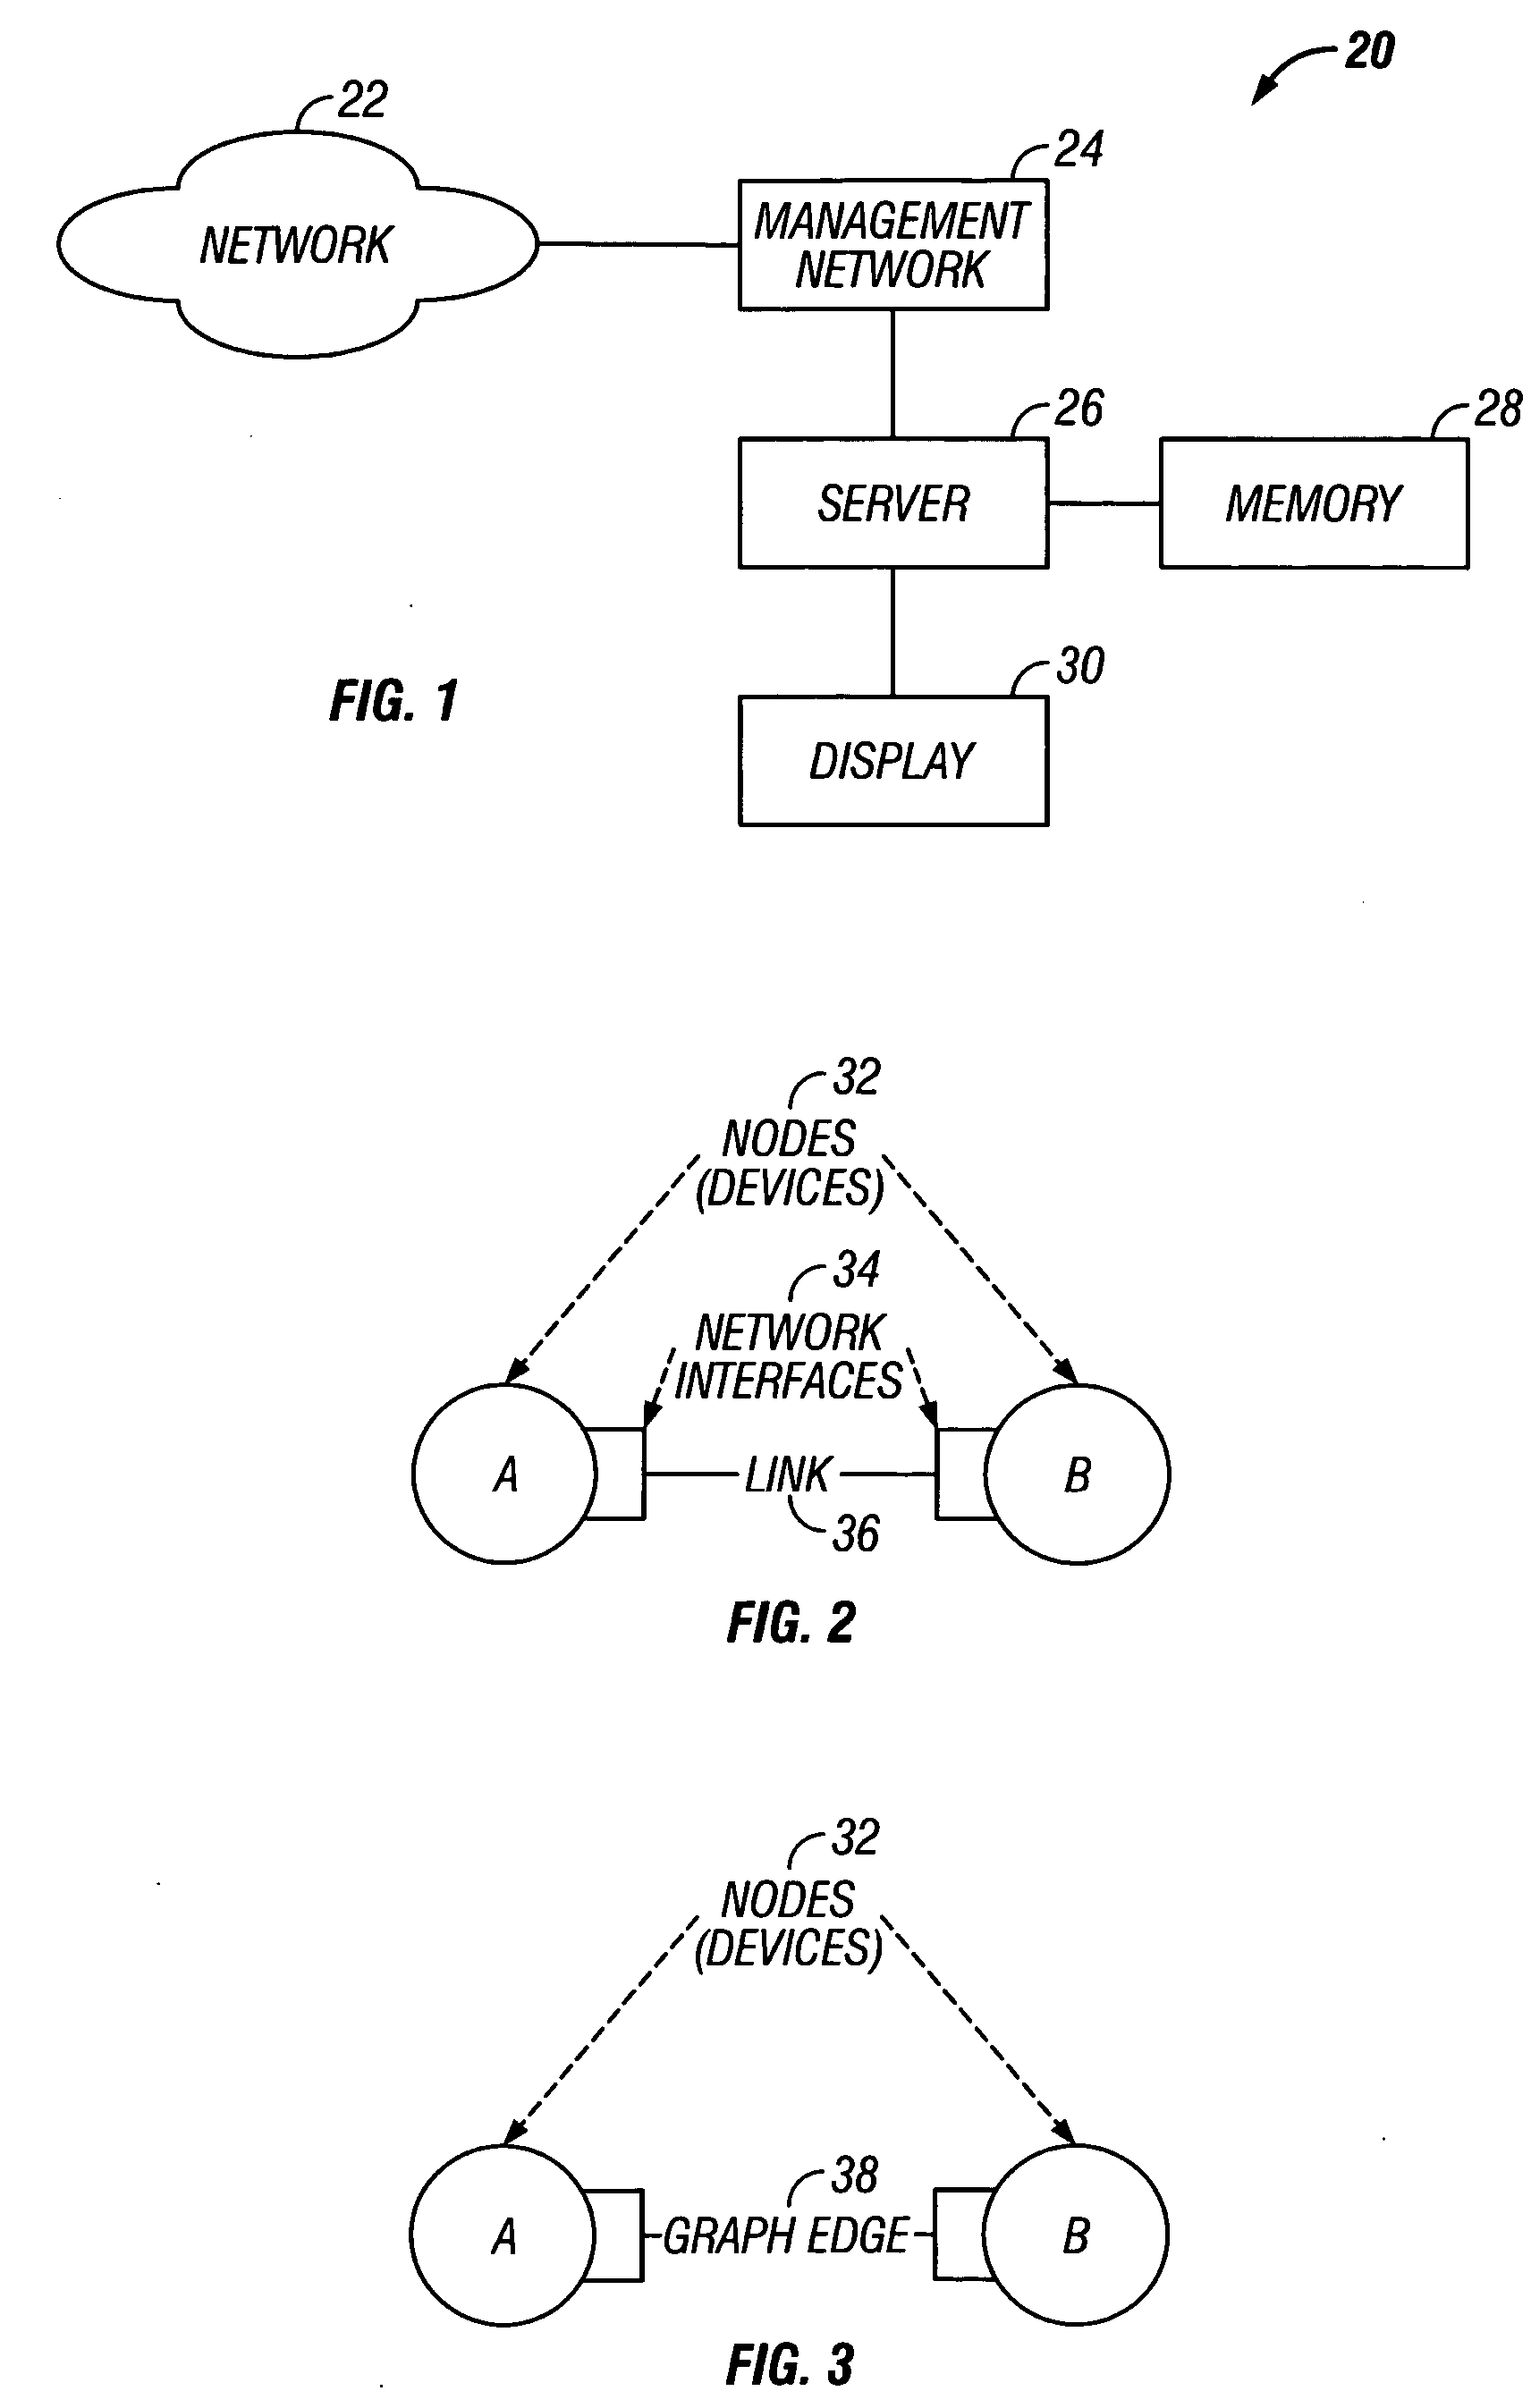 Performance and flow analysis method for communication networks